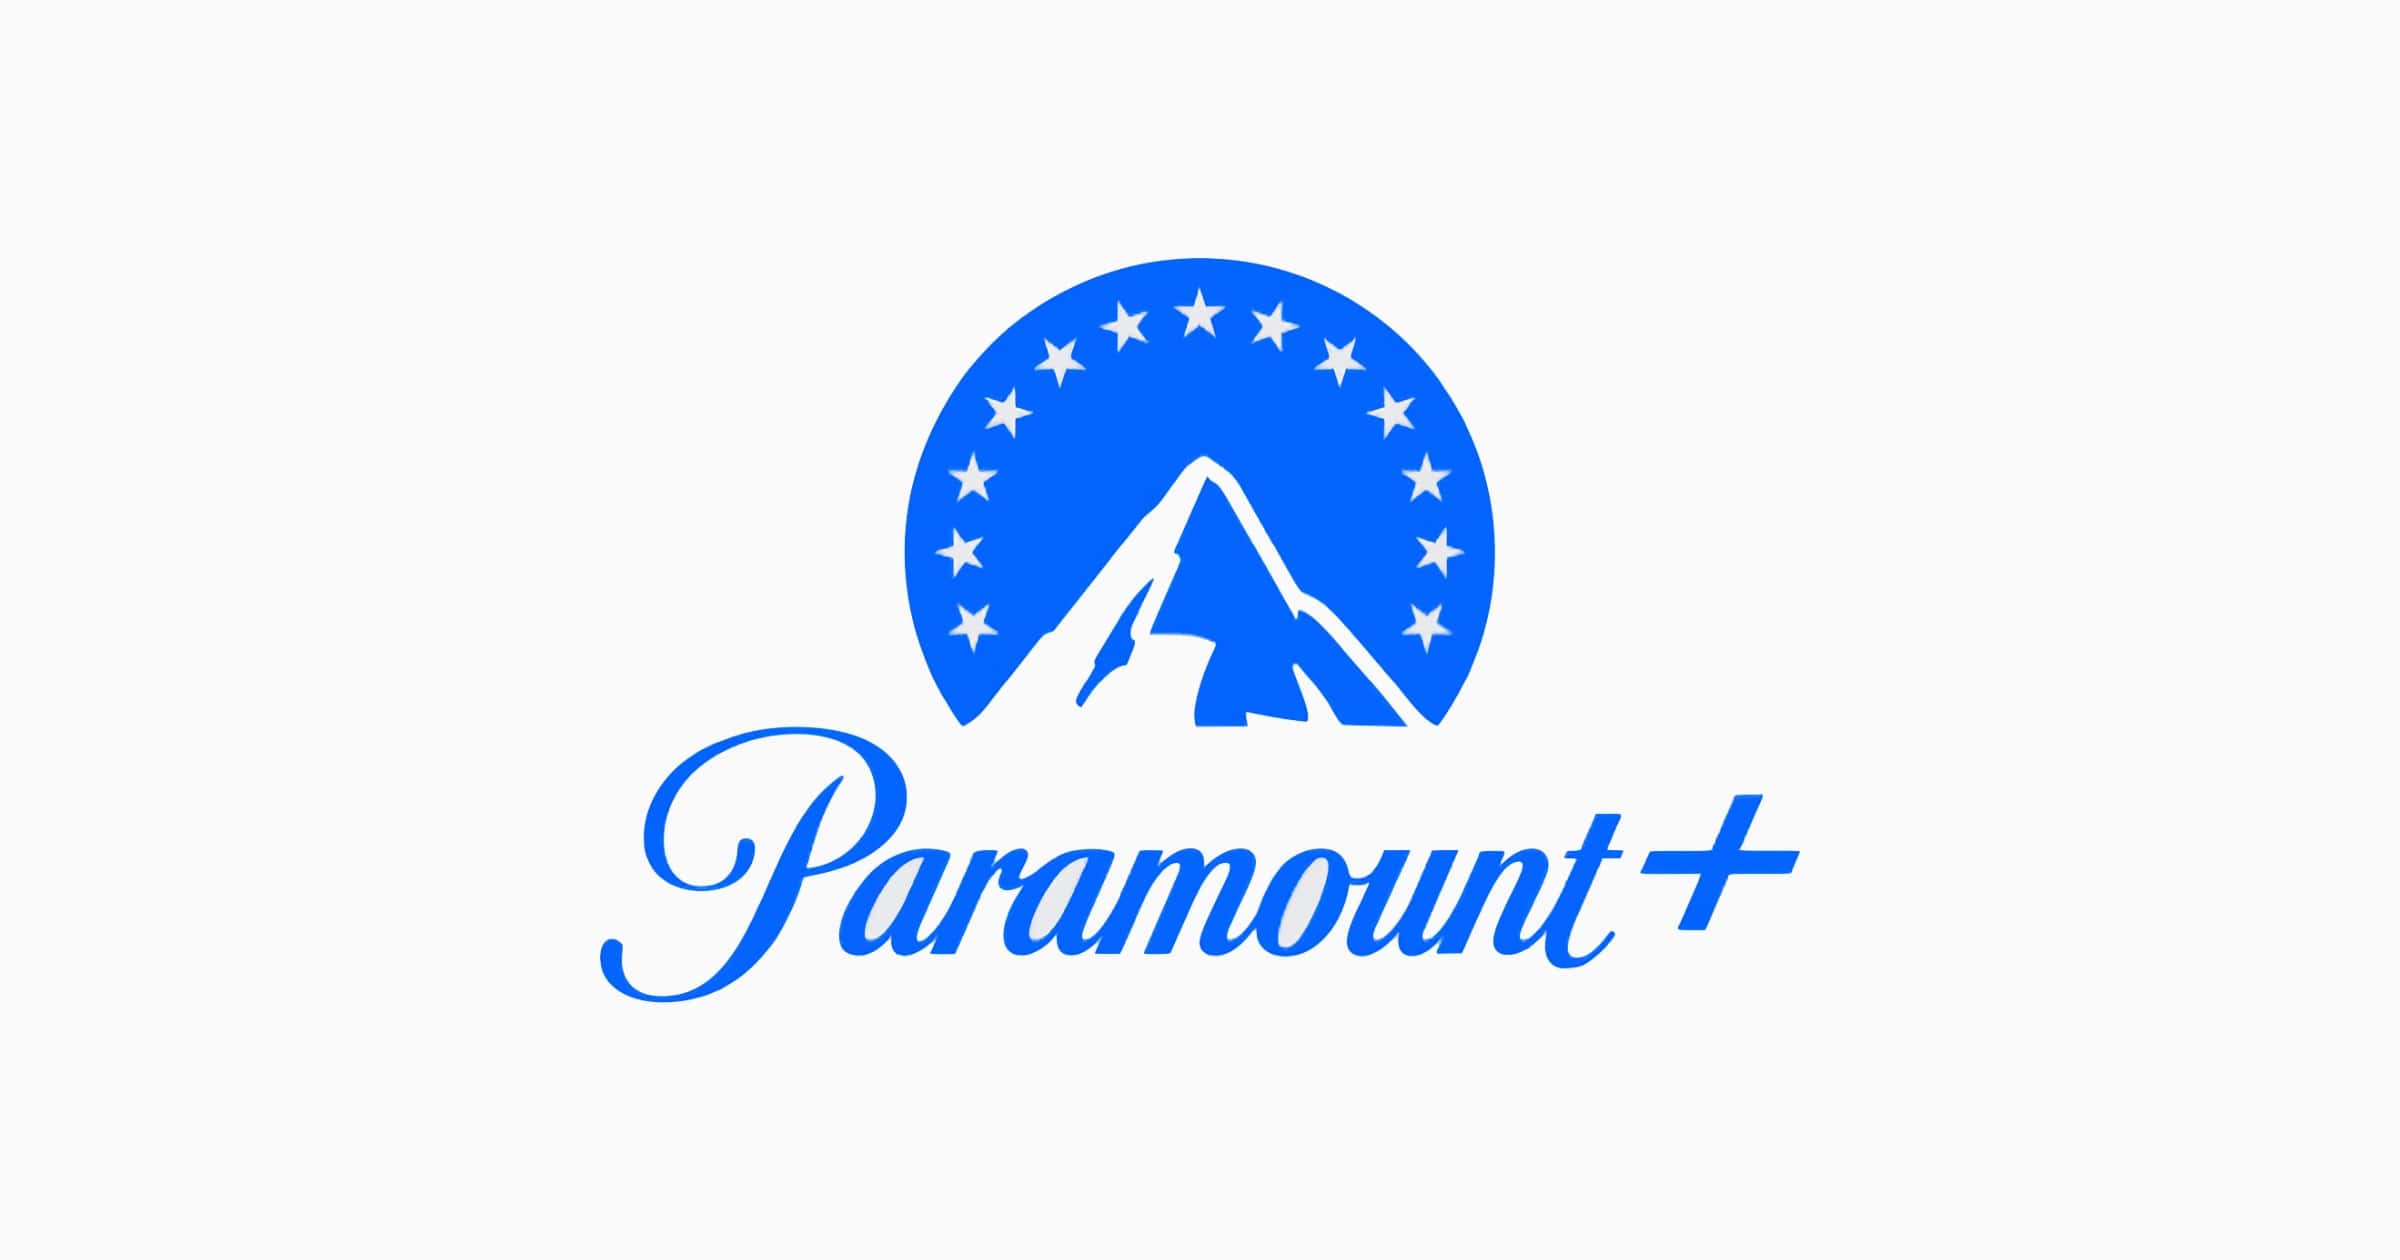 U.S. Users Can Get Paramount+ Free For a Month Via Apple TV